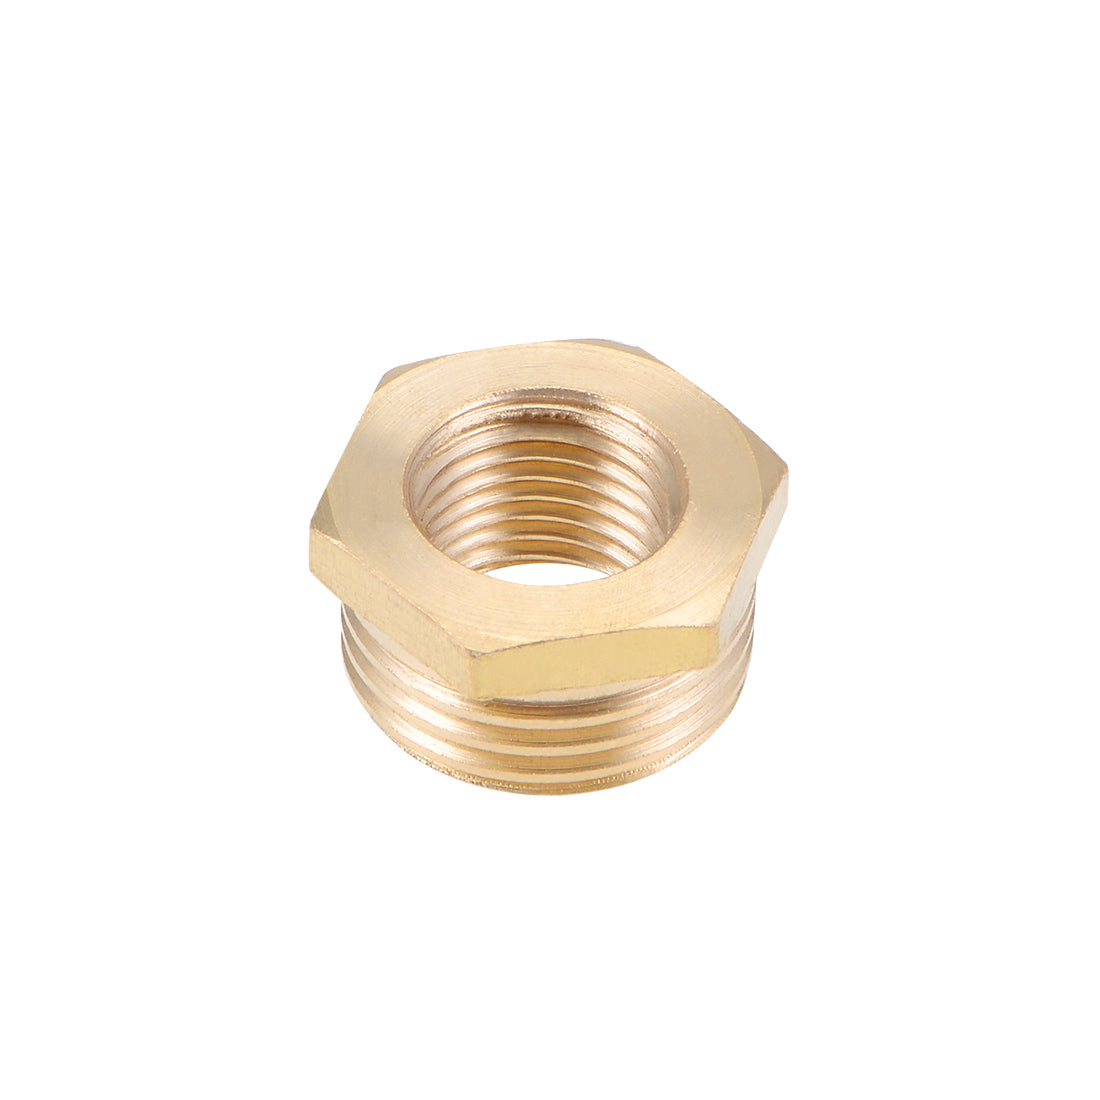 uxcell Uxcell Brass Threaded Pipe Fitting G1/2 Male x G1/4 Female Hex Bushing Adapter 5pcs